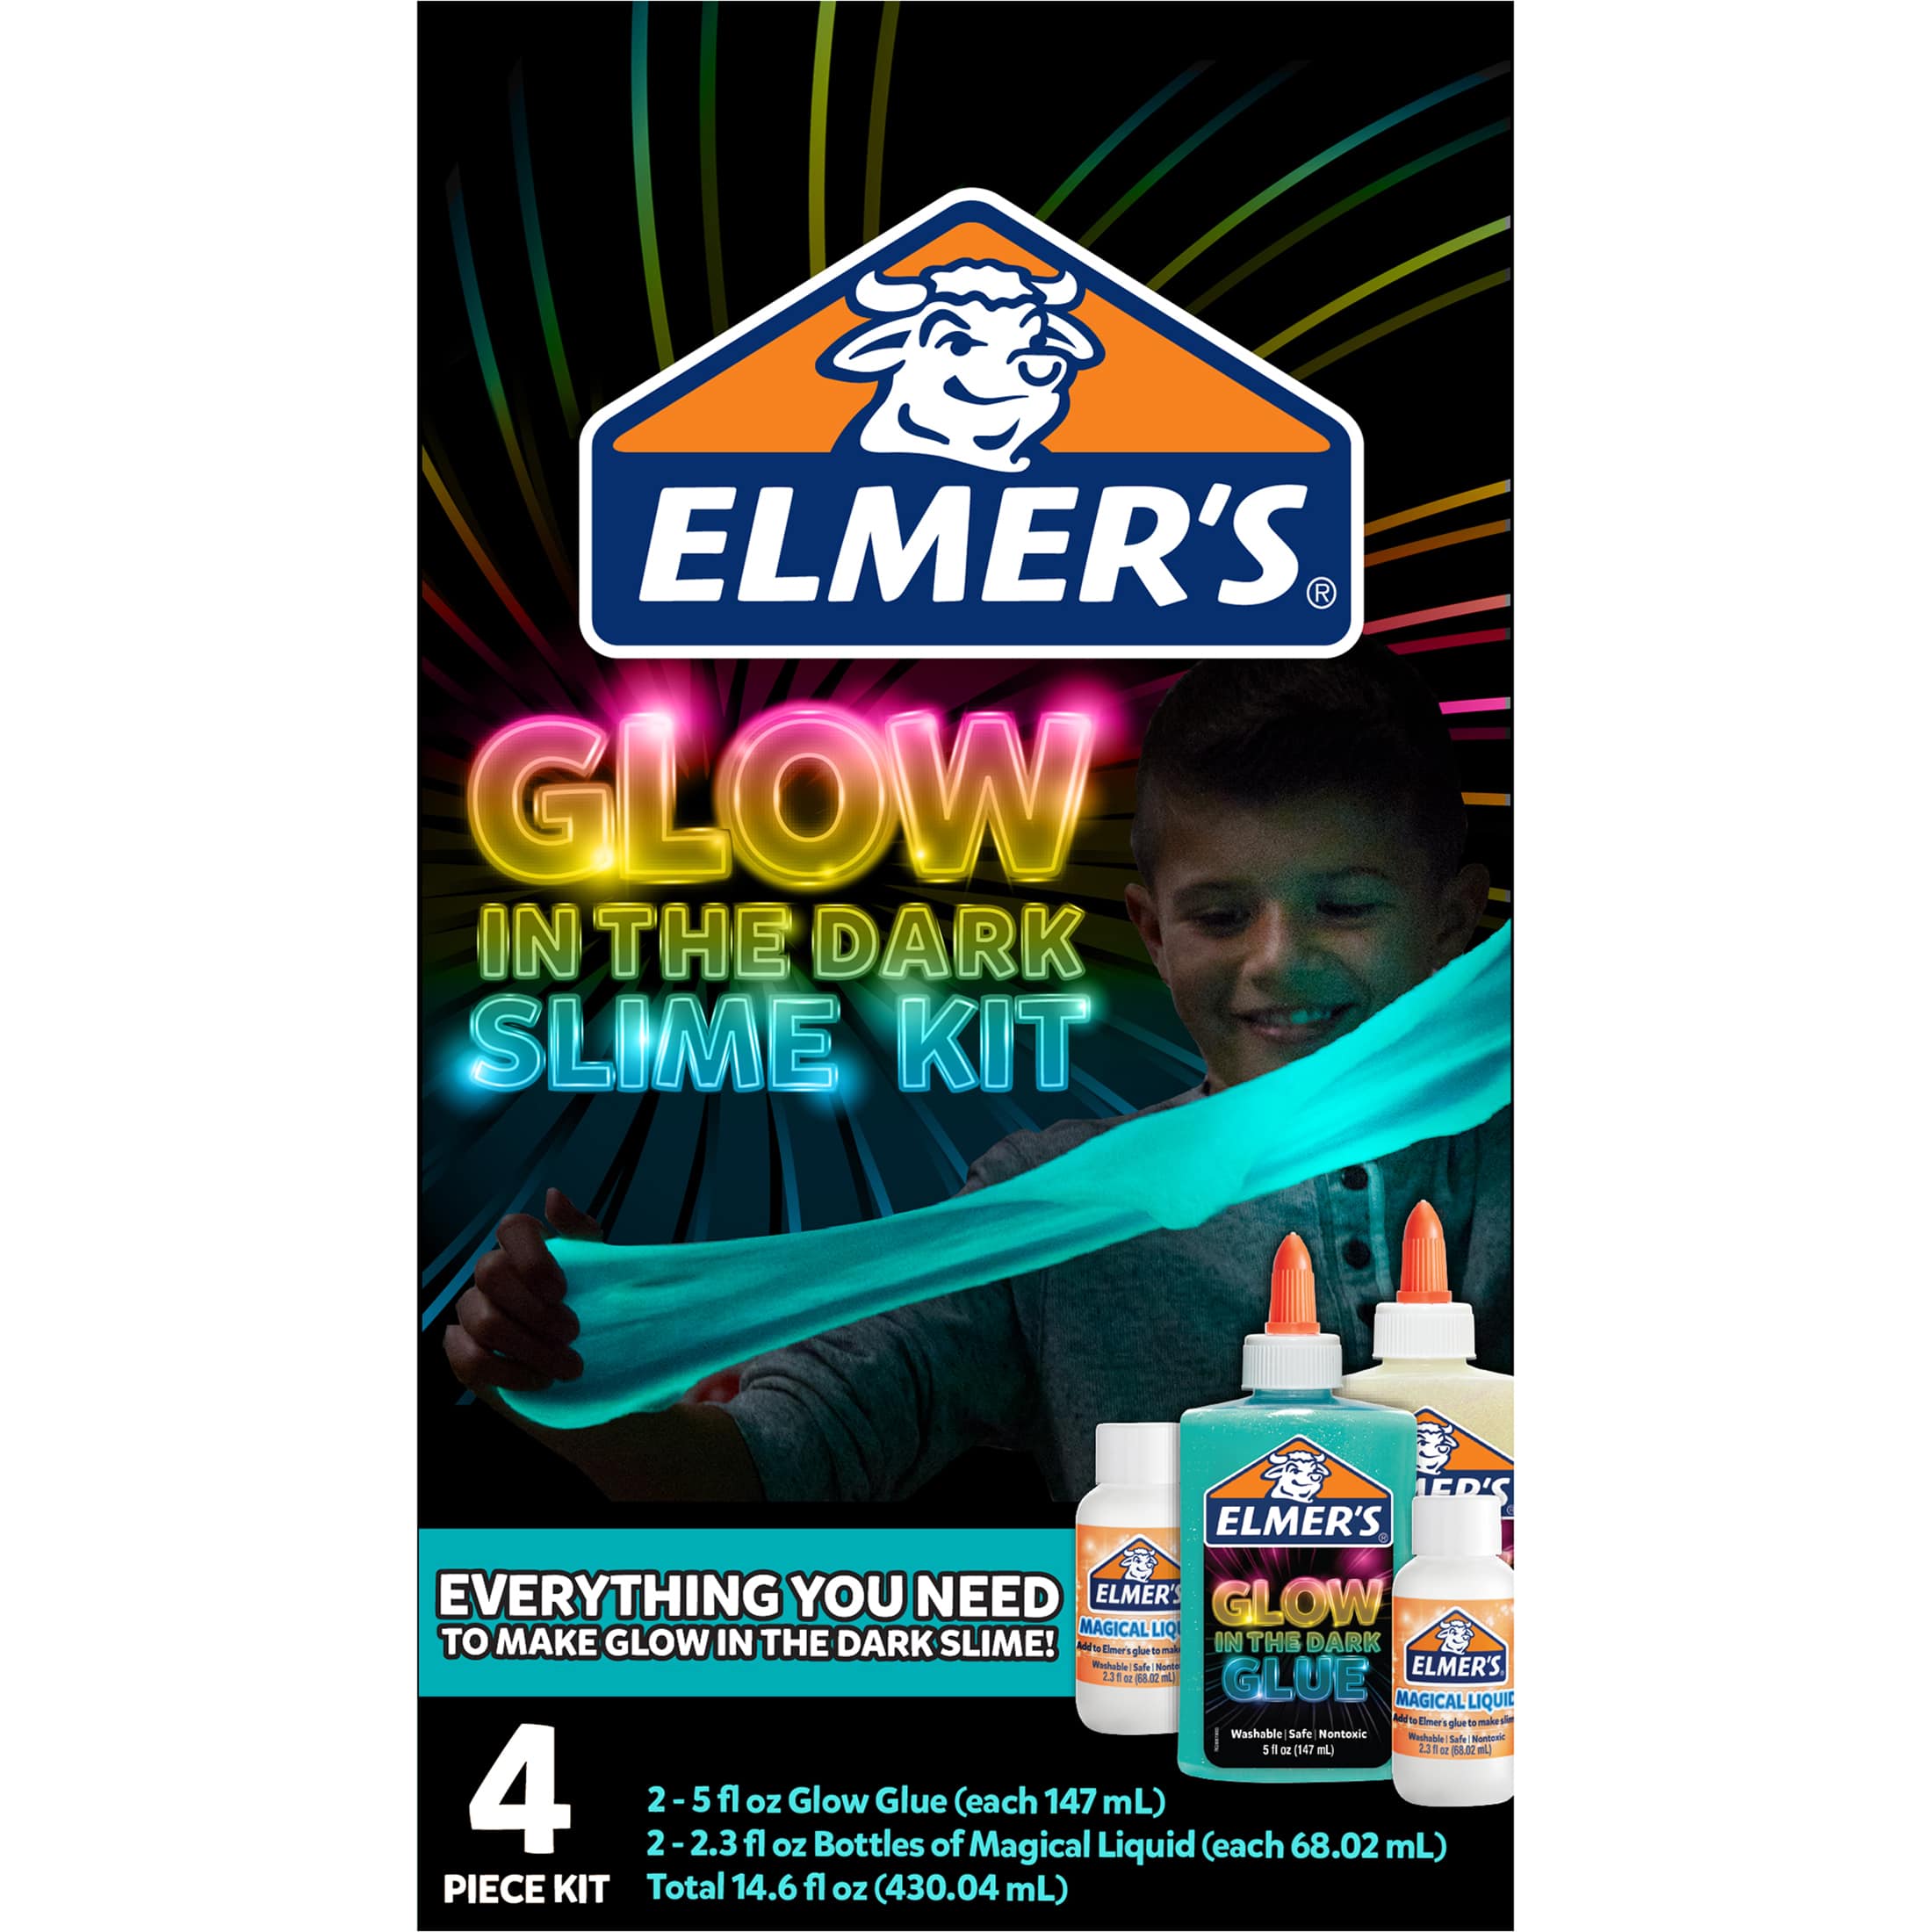 Elmer's Glow in the Dark Glue 6-Count Variety Pack Just $9.99 on